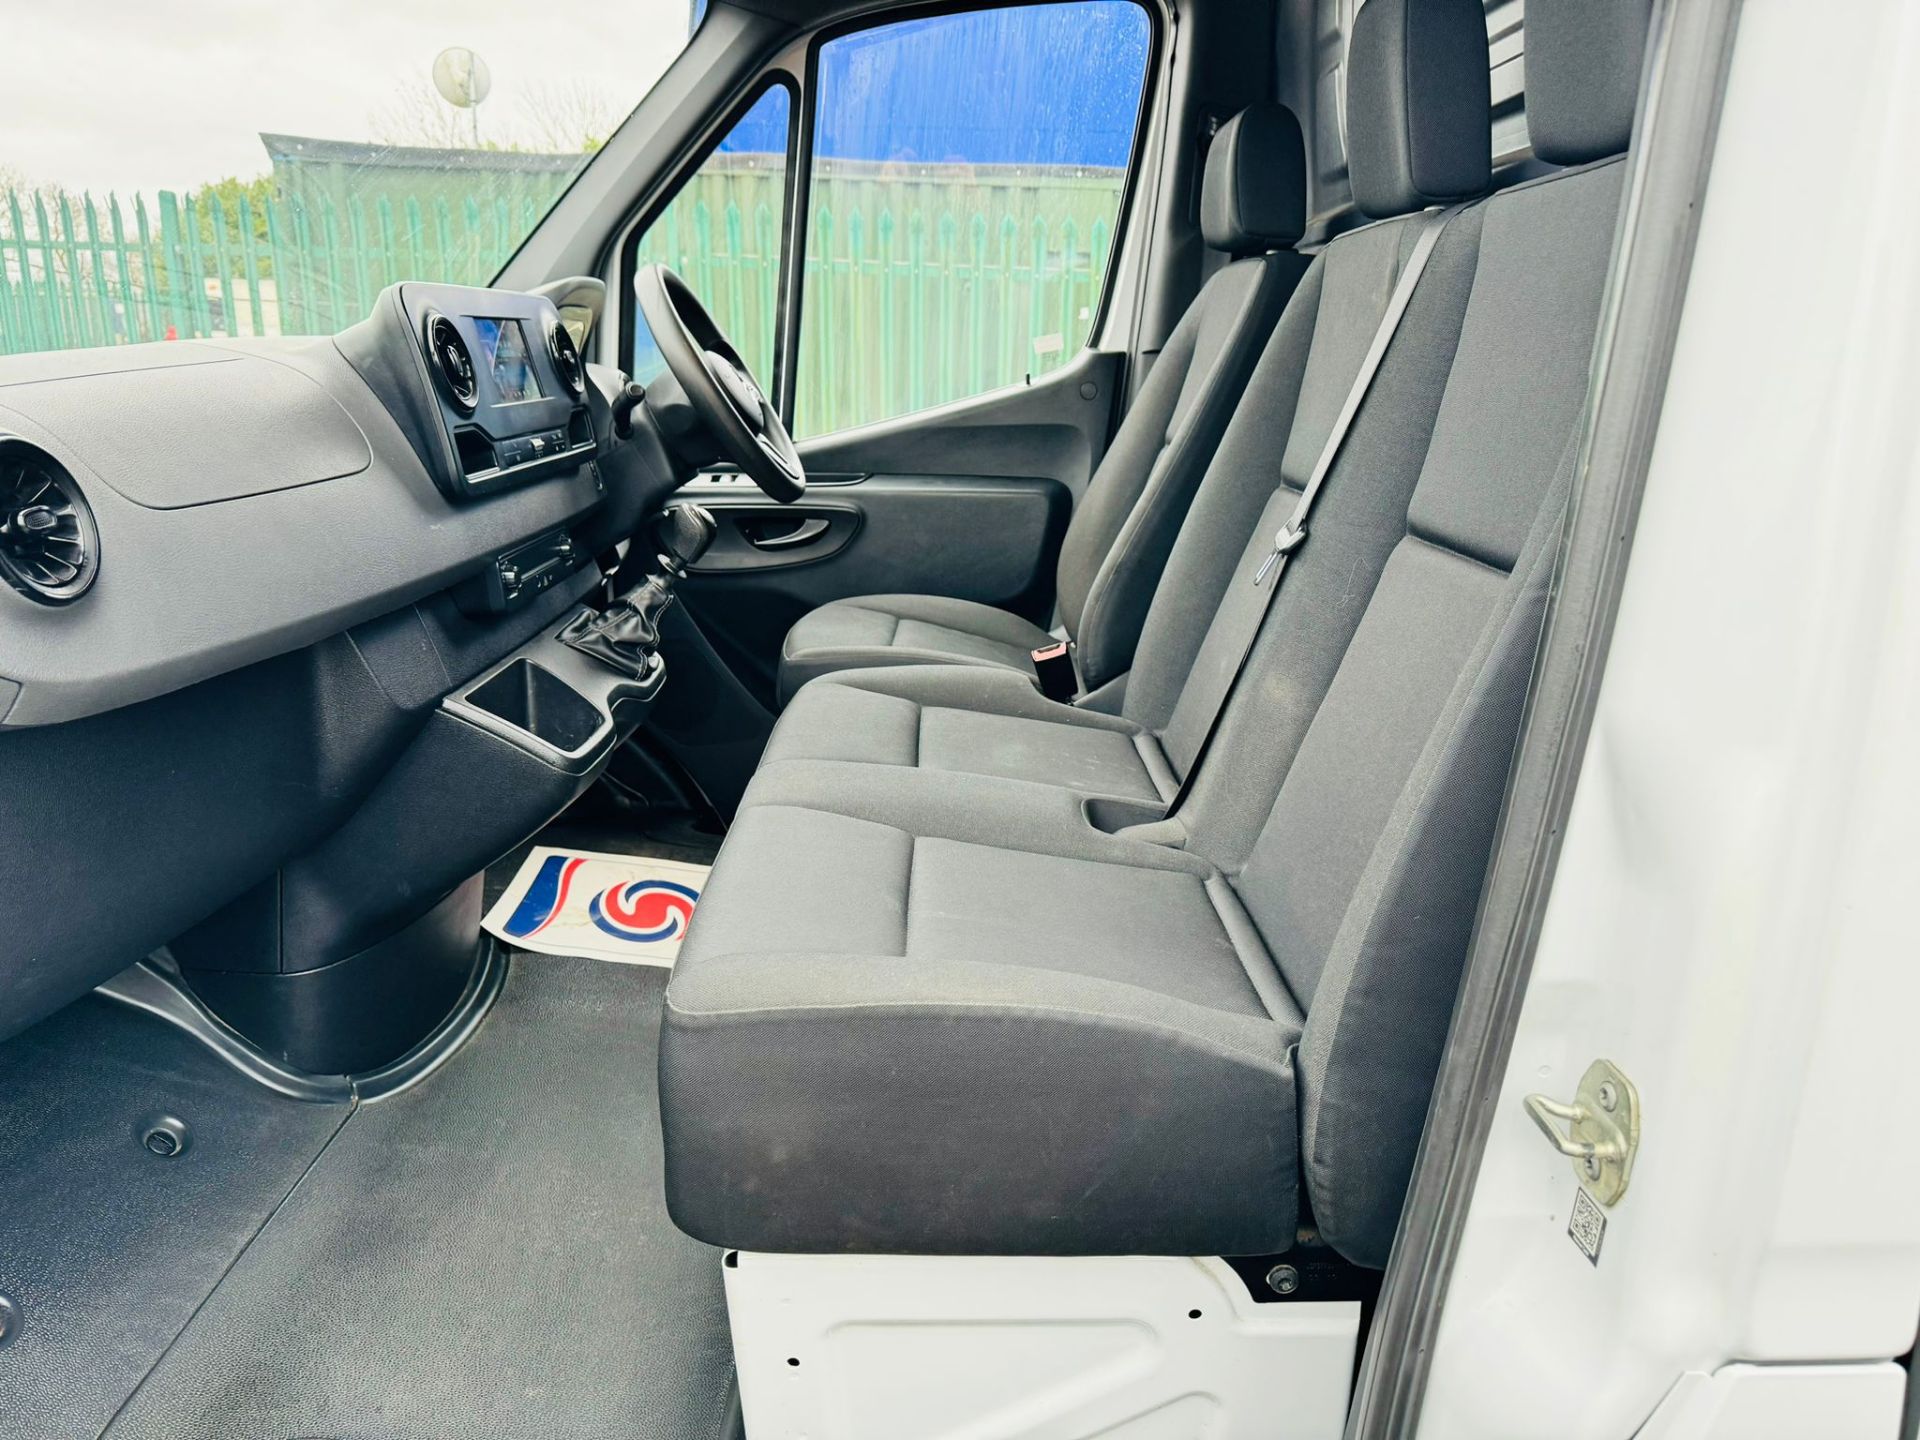 MERCEDES SPRINTER 314CDI MWB HI ROOF - 2019 19 Reg - 1 Owner From New - Euro 6 - NEW SHAPE!!. - Image 3 of 8